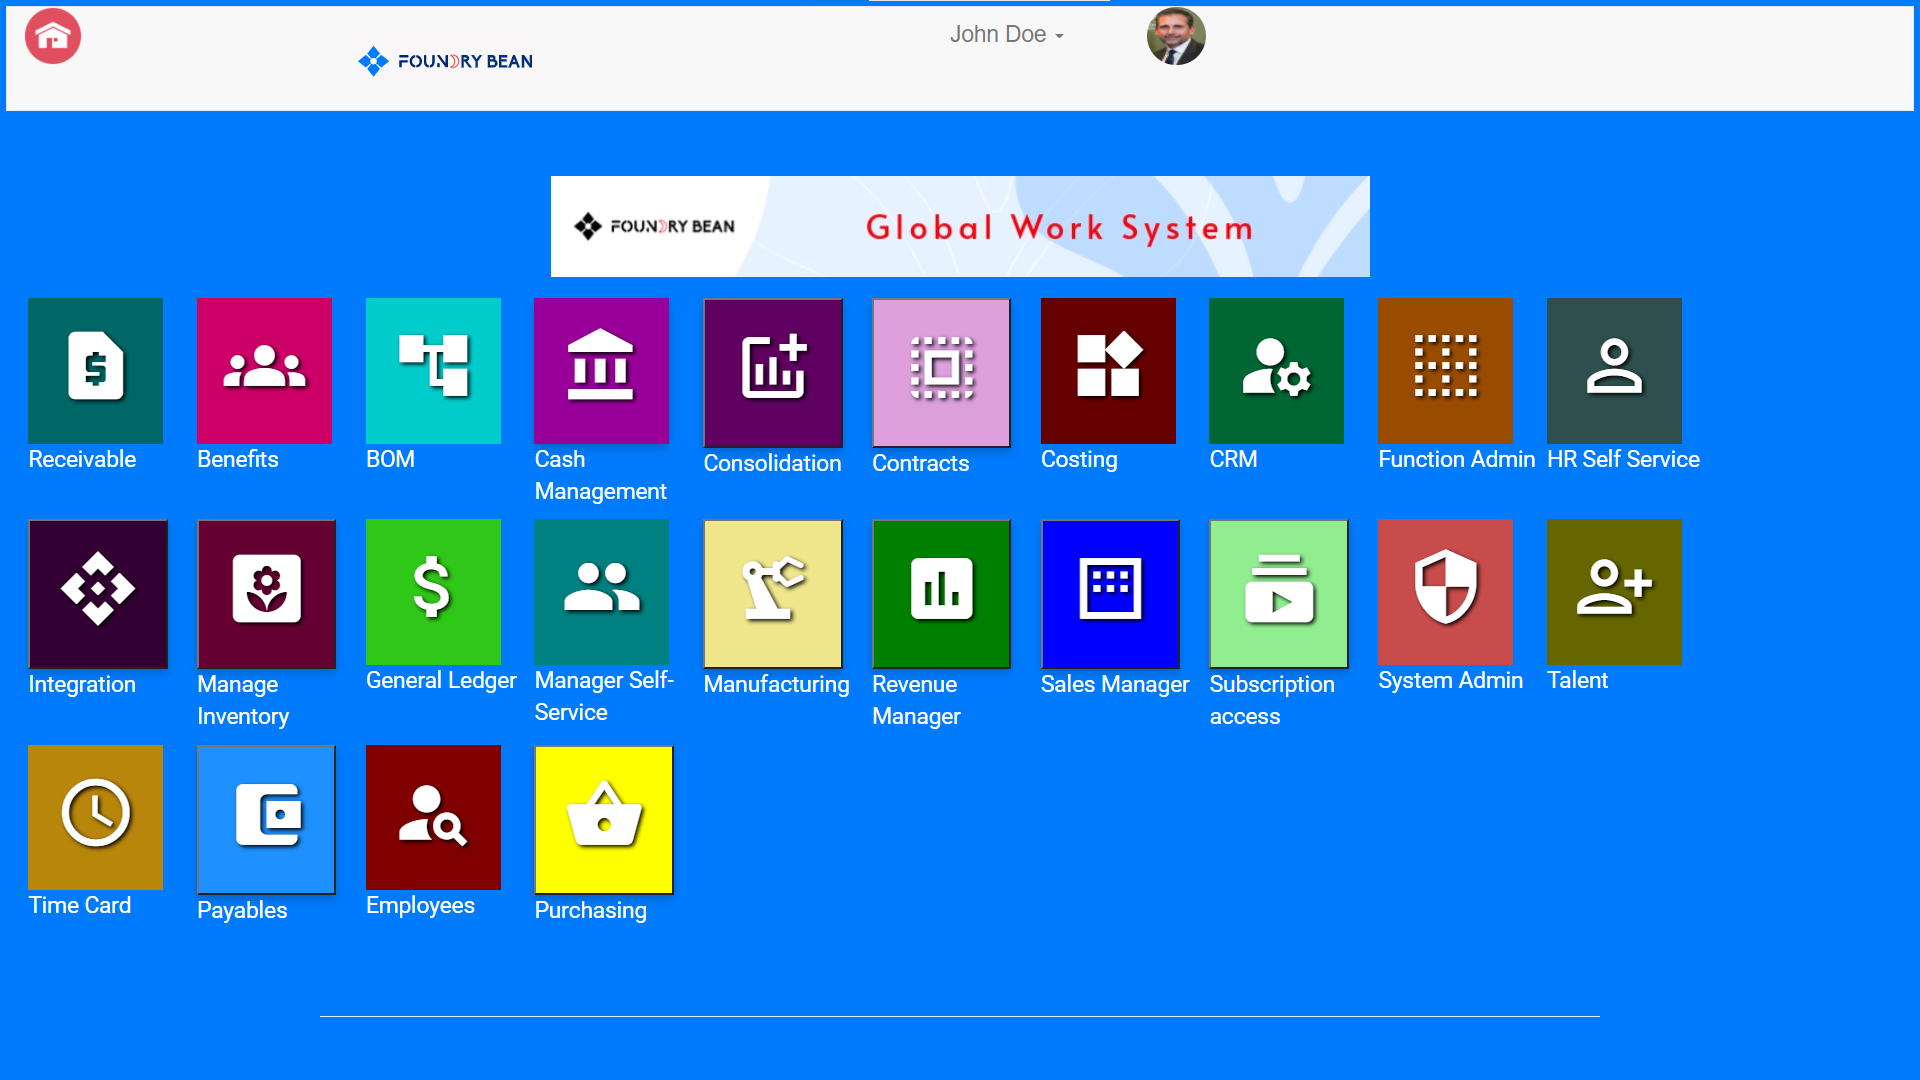 Foundry Bean Global Work System 812e67e0-ef45-484f-8ea9-4a098900b127.png